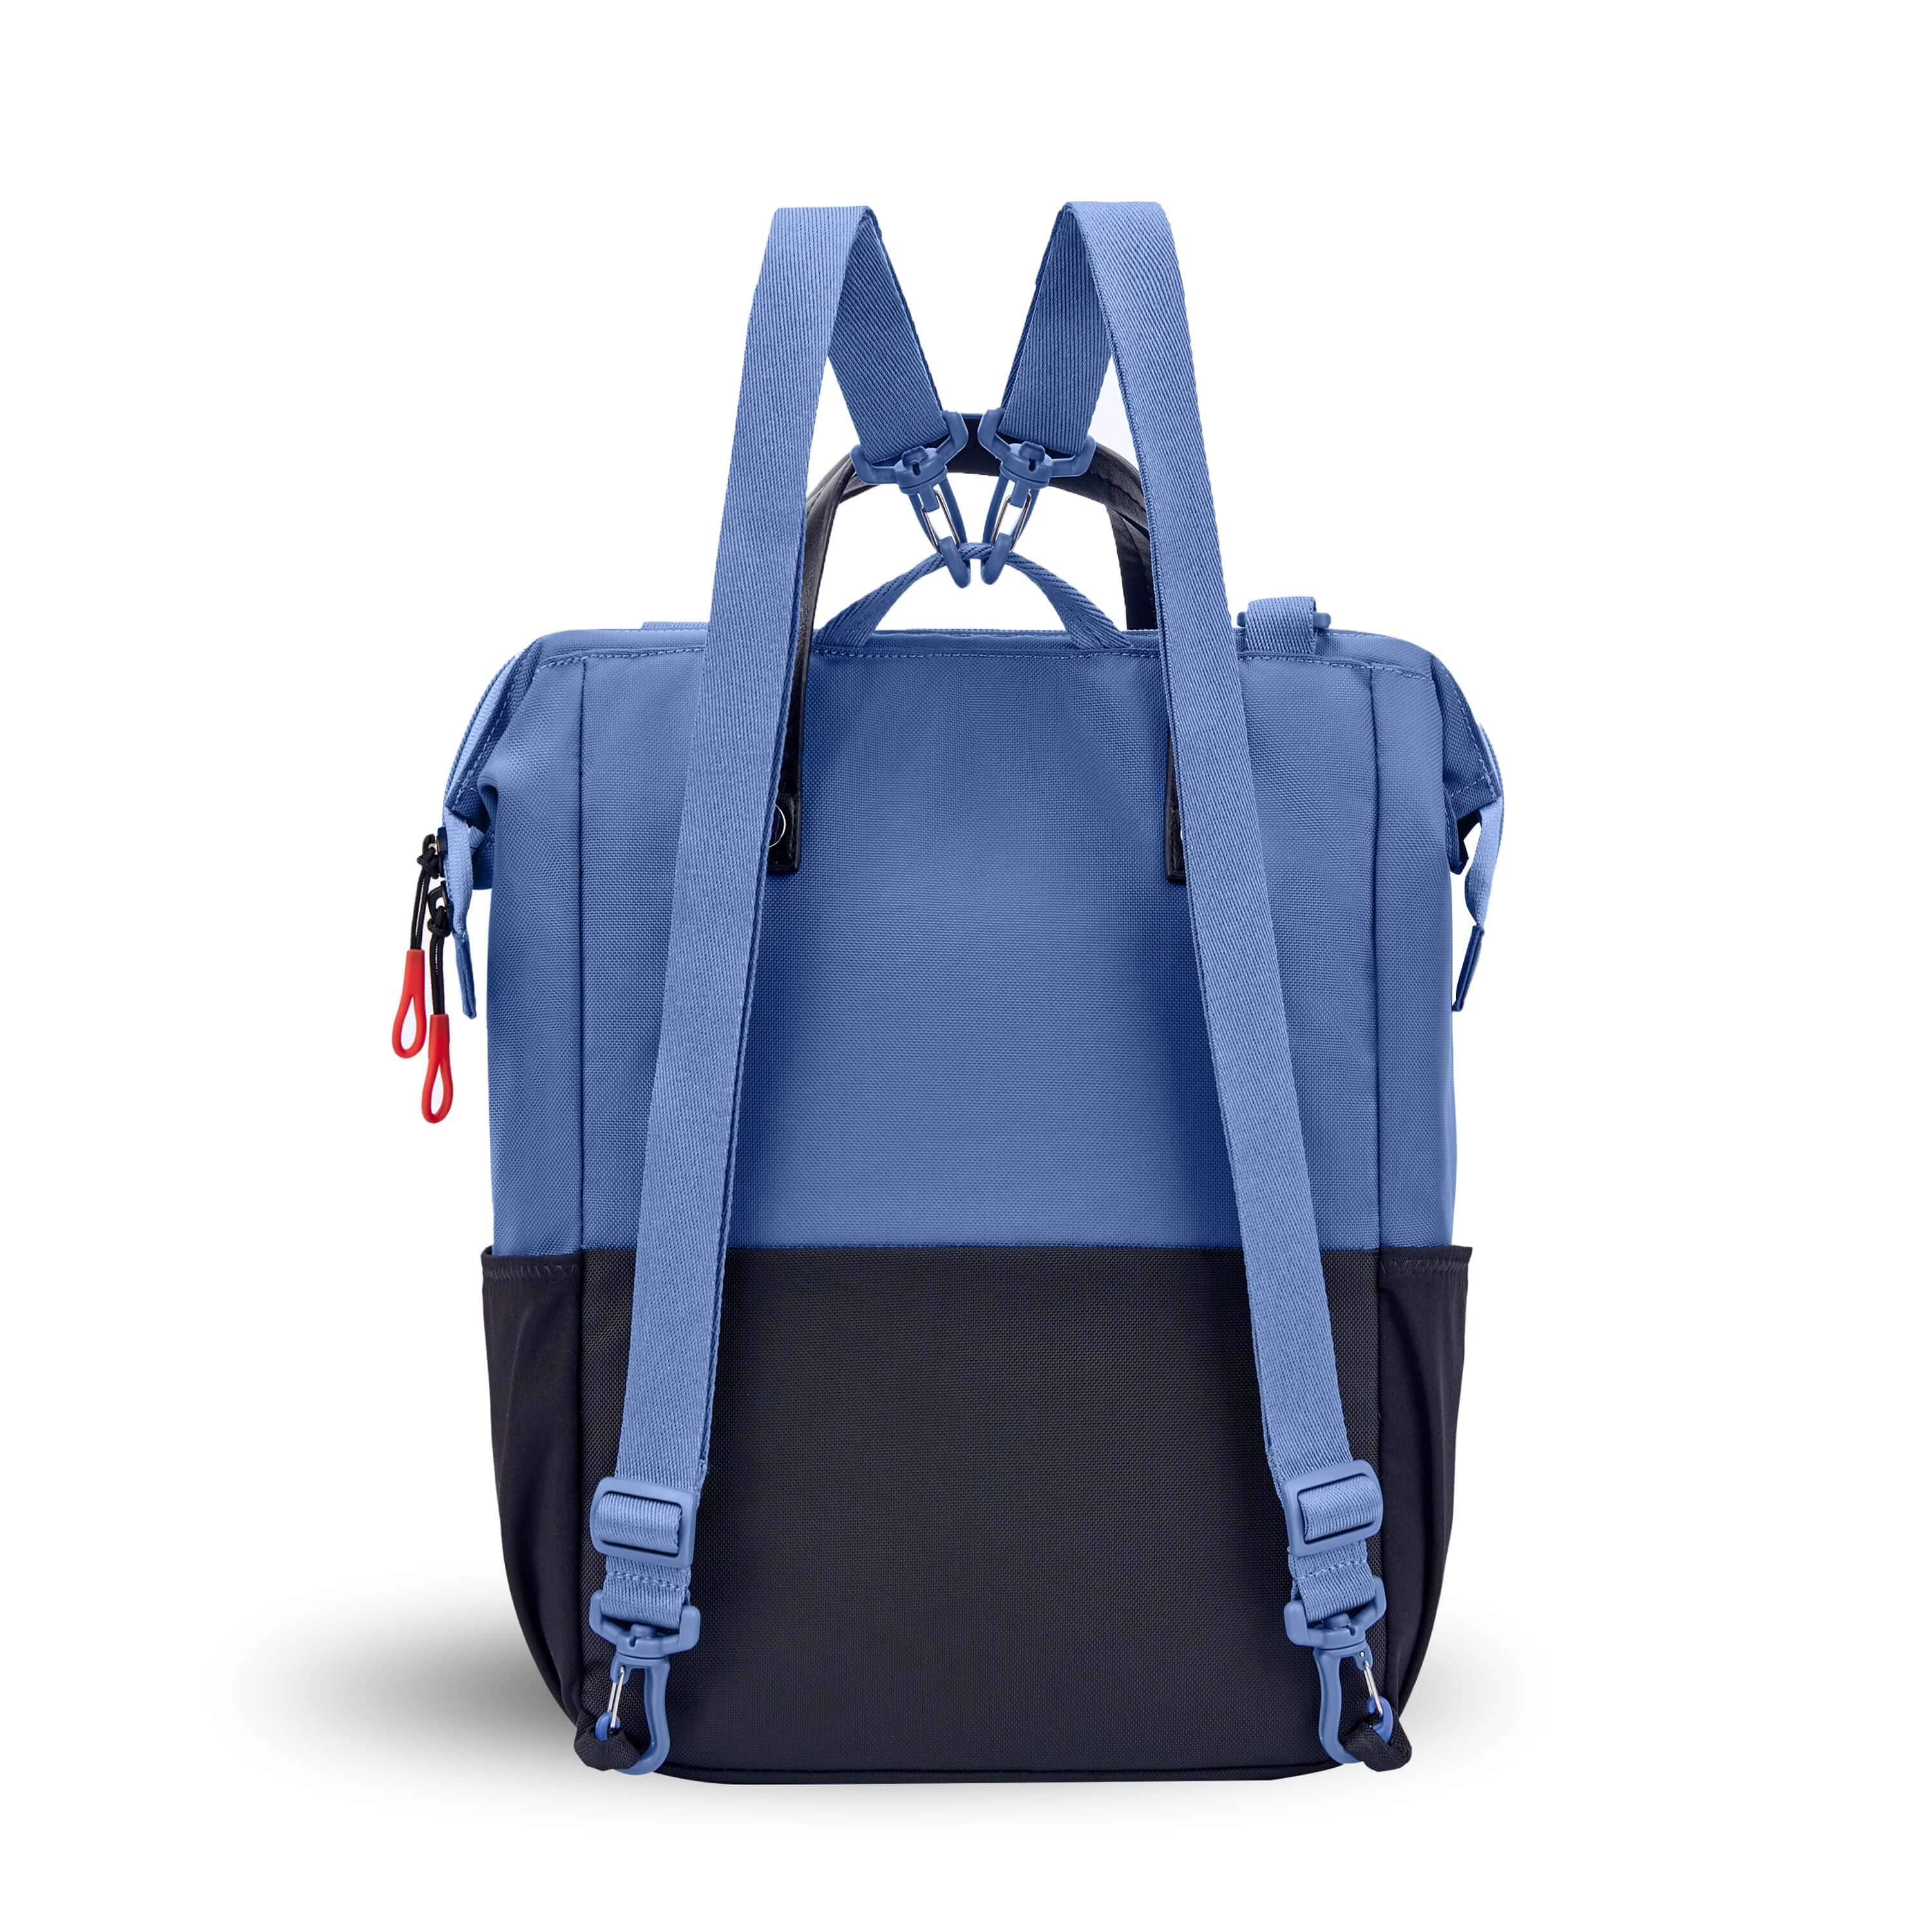 Back view of Sherpani three in one bag, the Dispatch in Pacific Blue. The detachable straps are shown in the backpack style. 